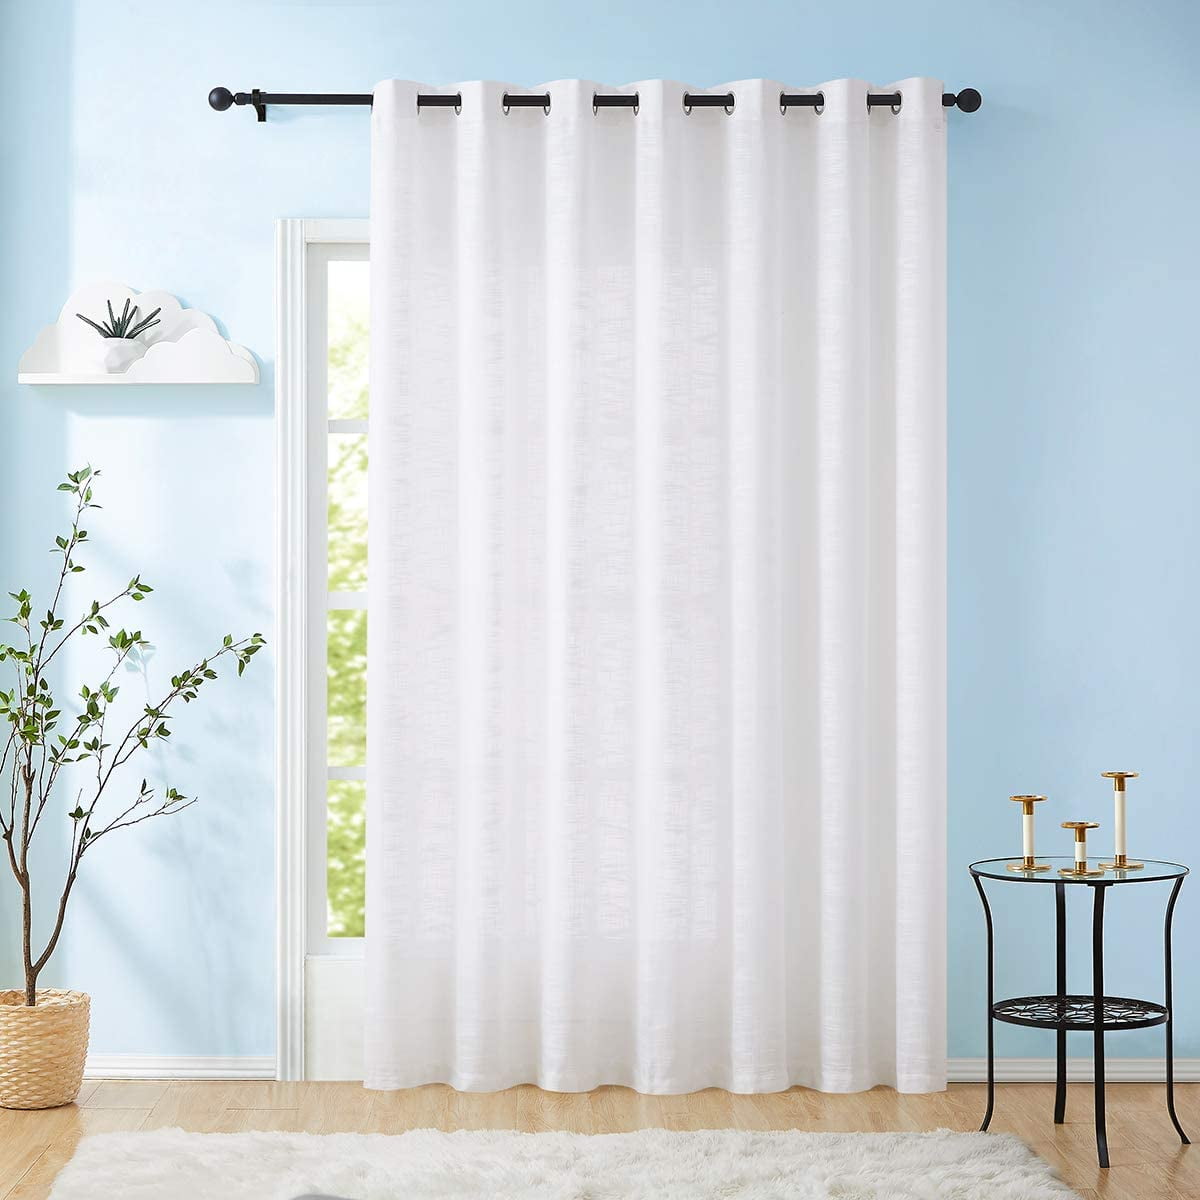 1pc Printed Blackout Window Curtains Bedroom Living Room White Lined Fabric 